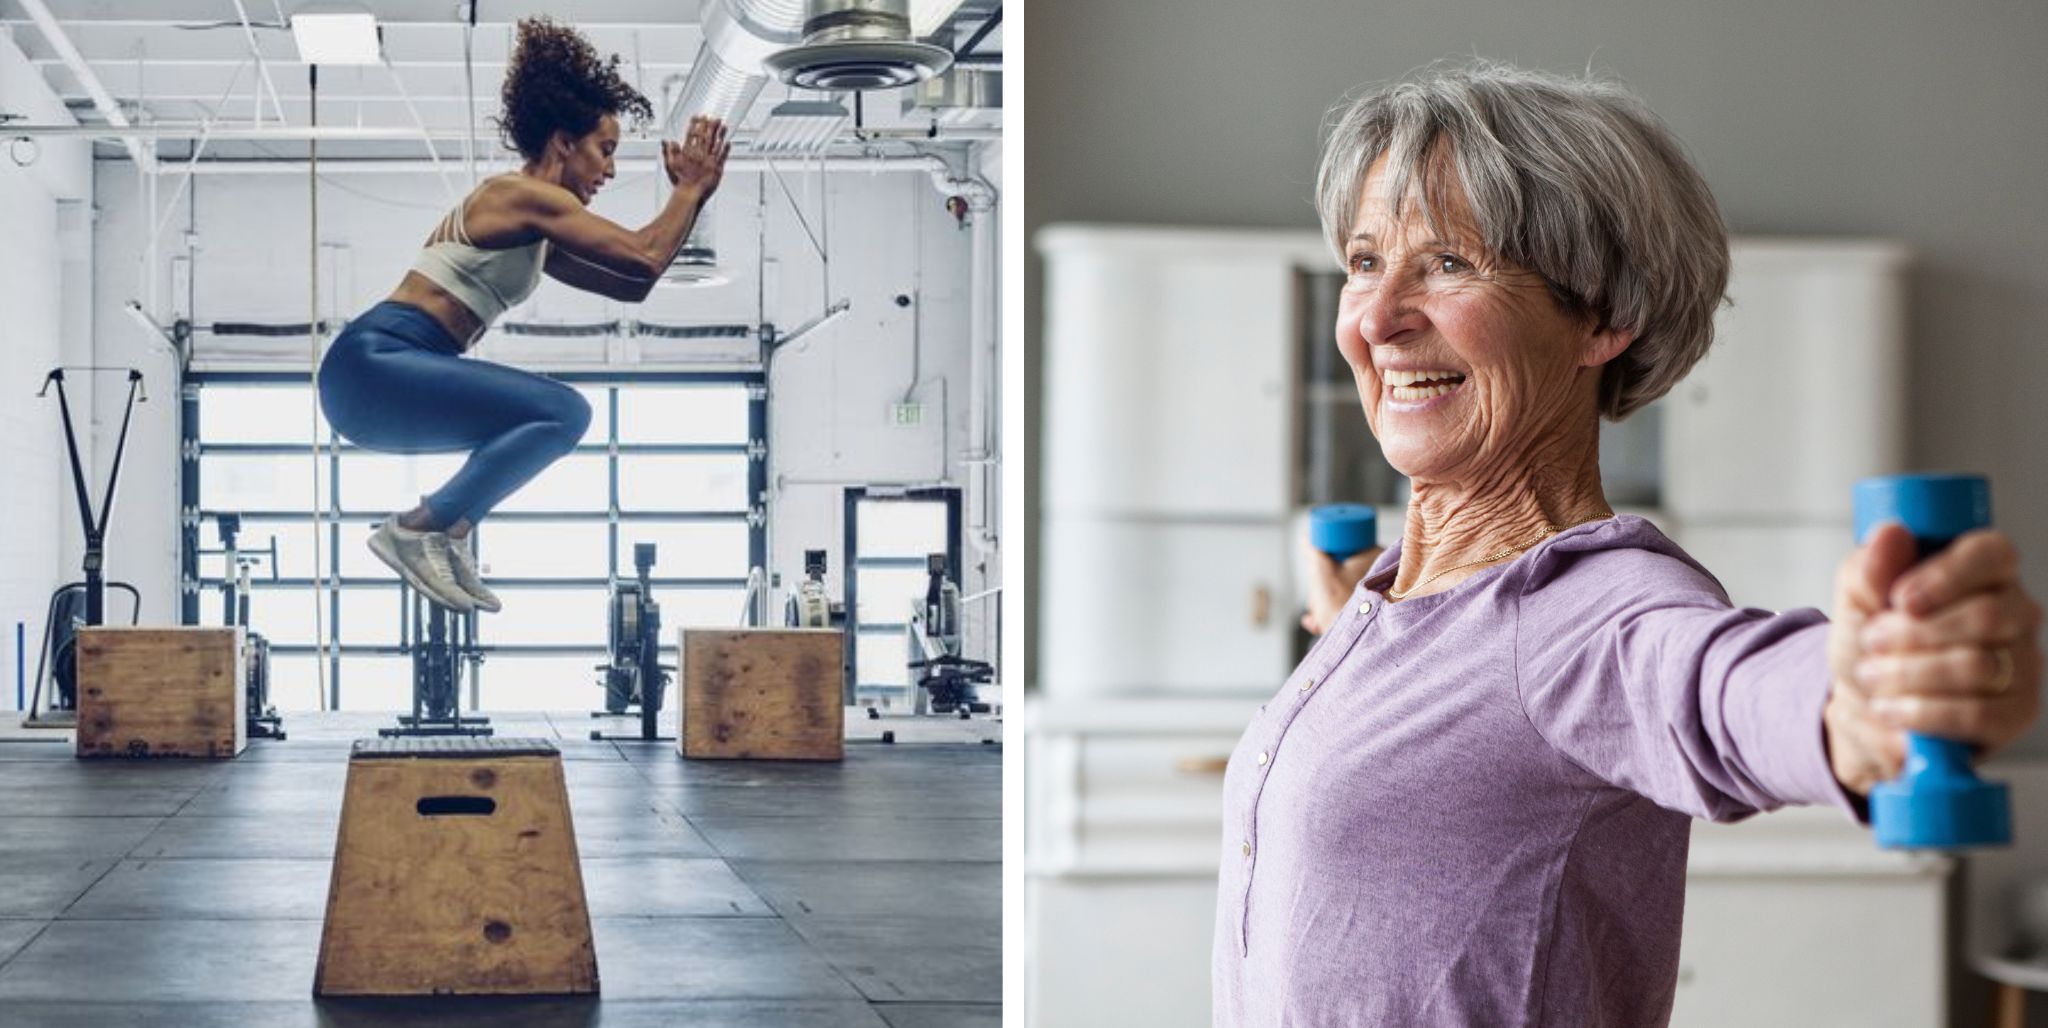 Senior Fitness and Senior Exercises. Building Fitness in your 50s